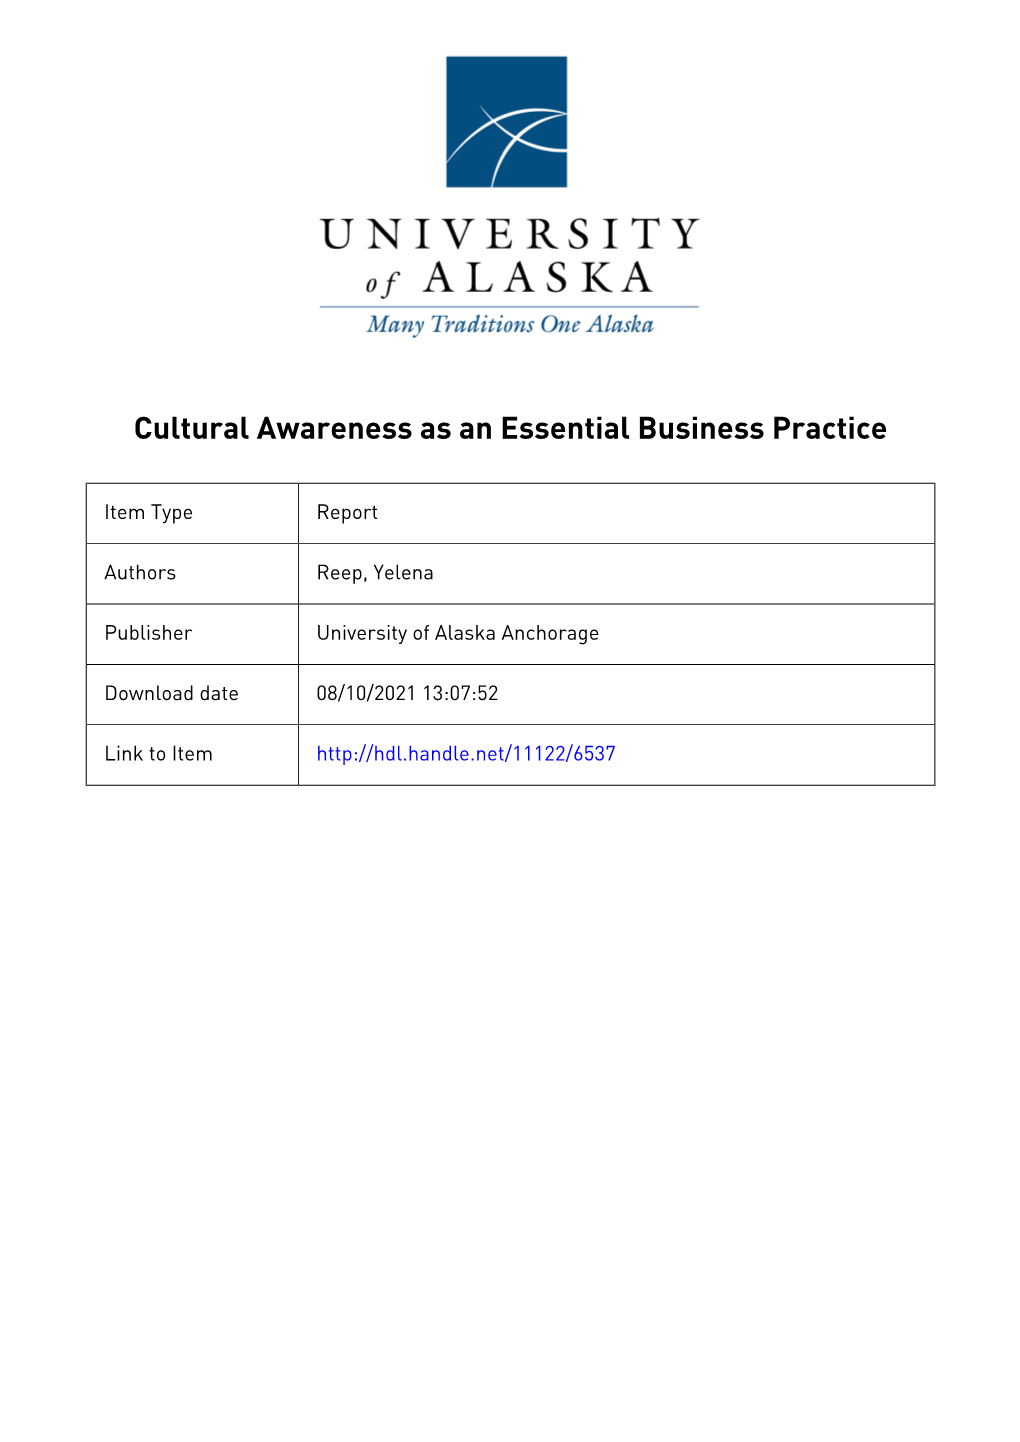 Cultural Awareness As an Essential Business Practice